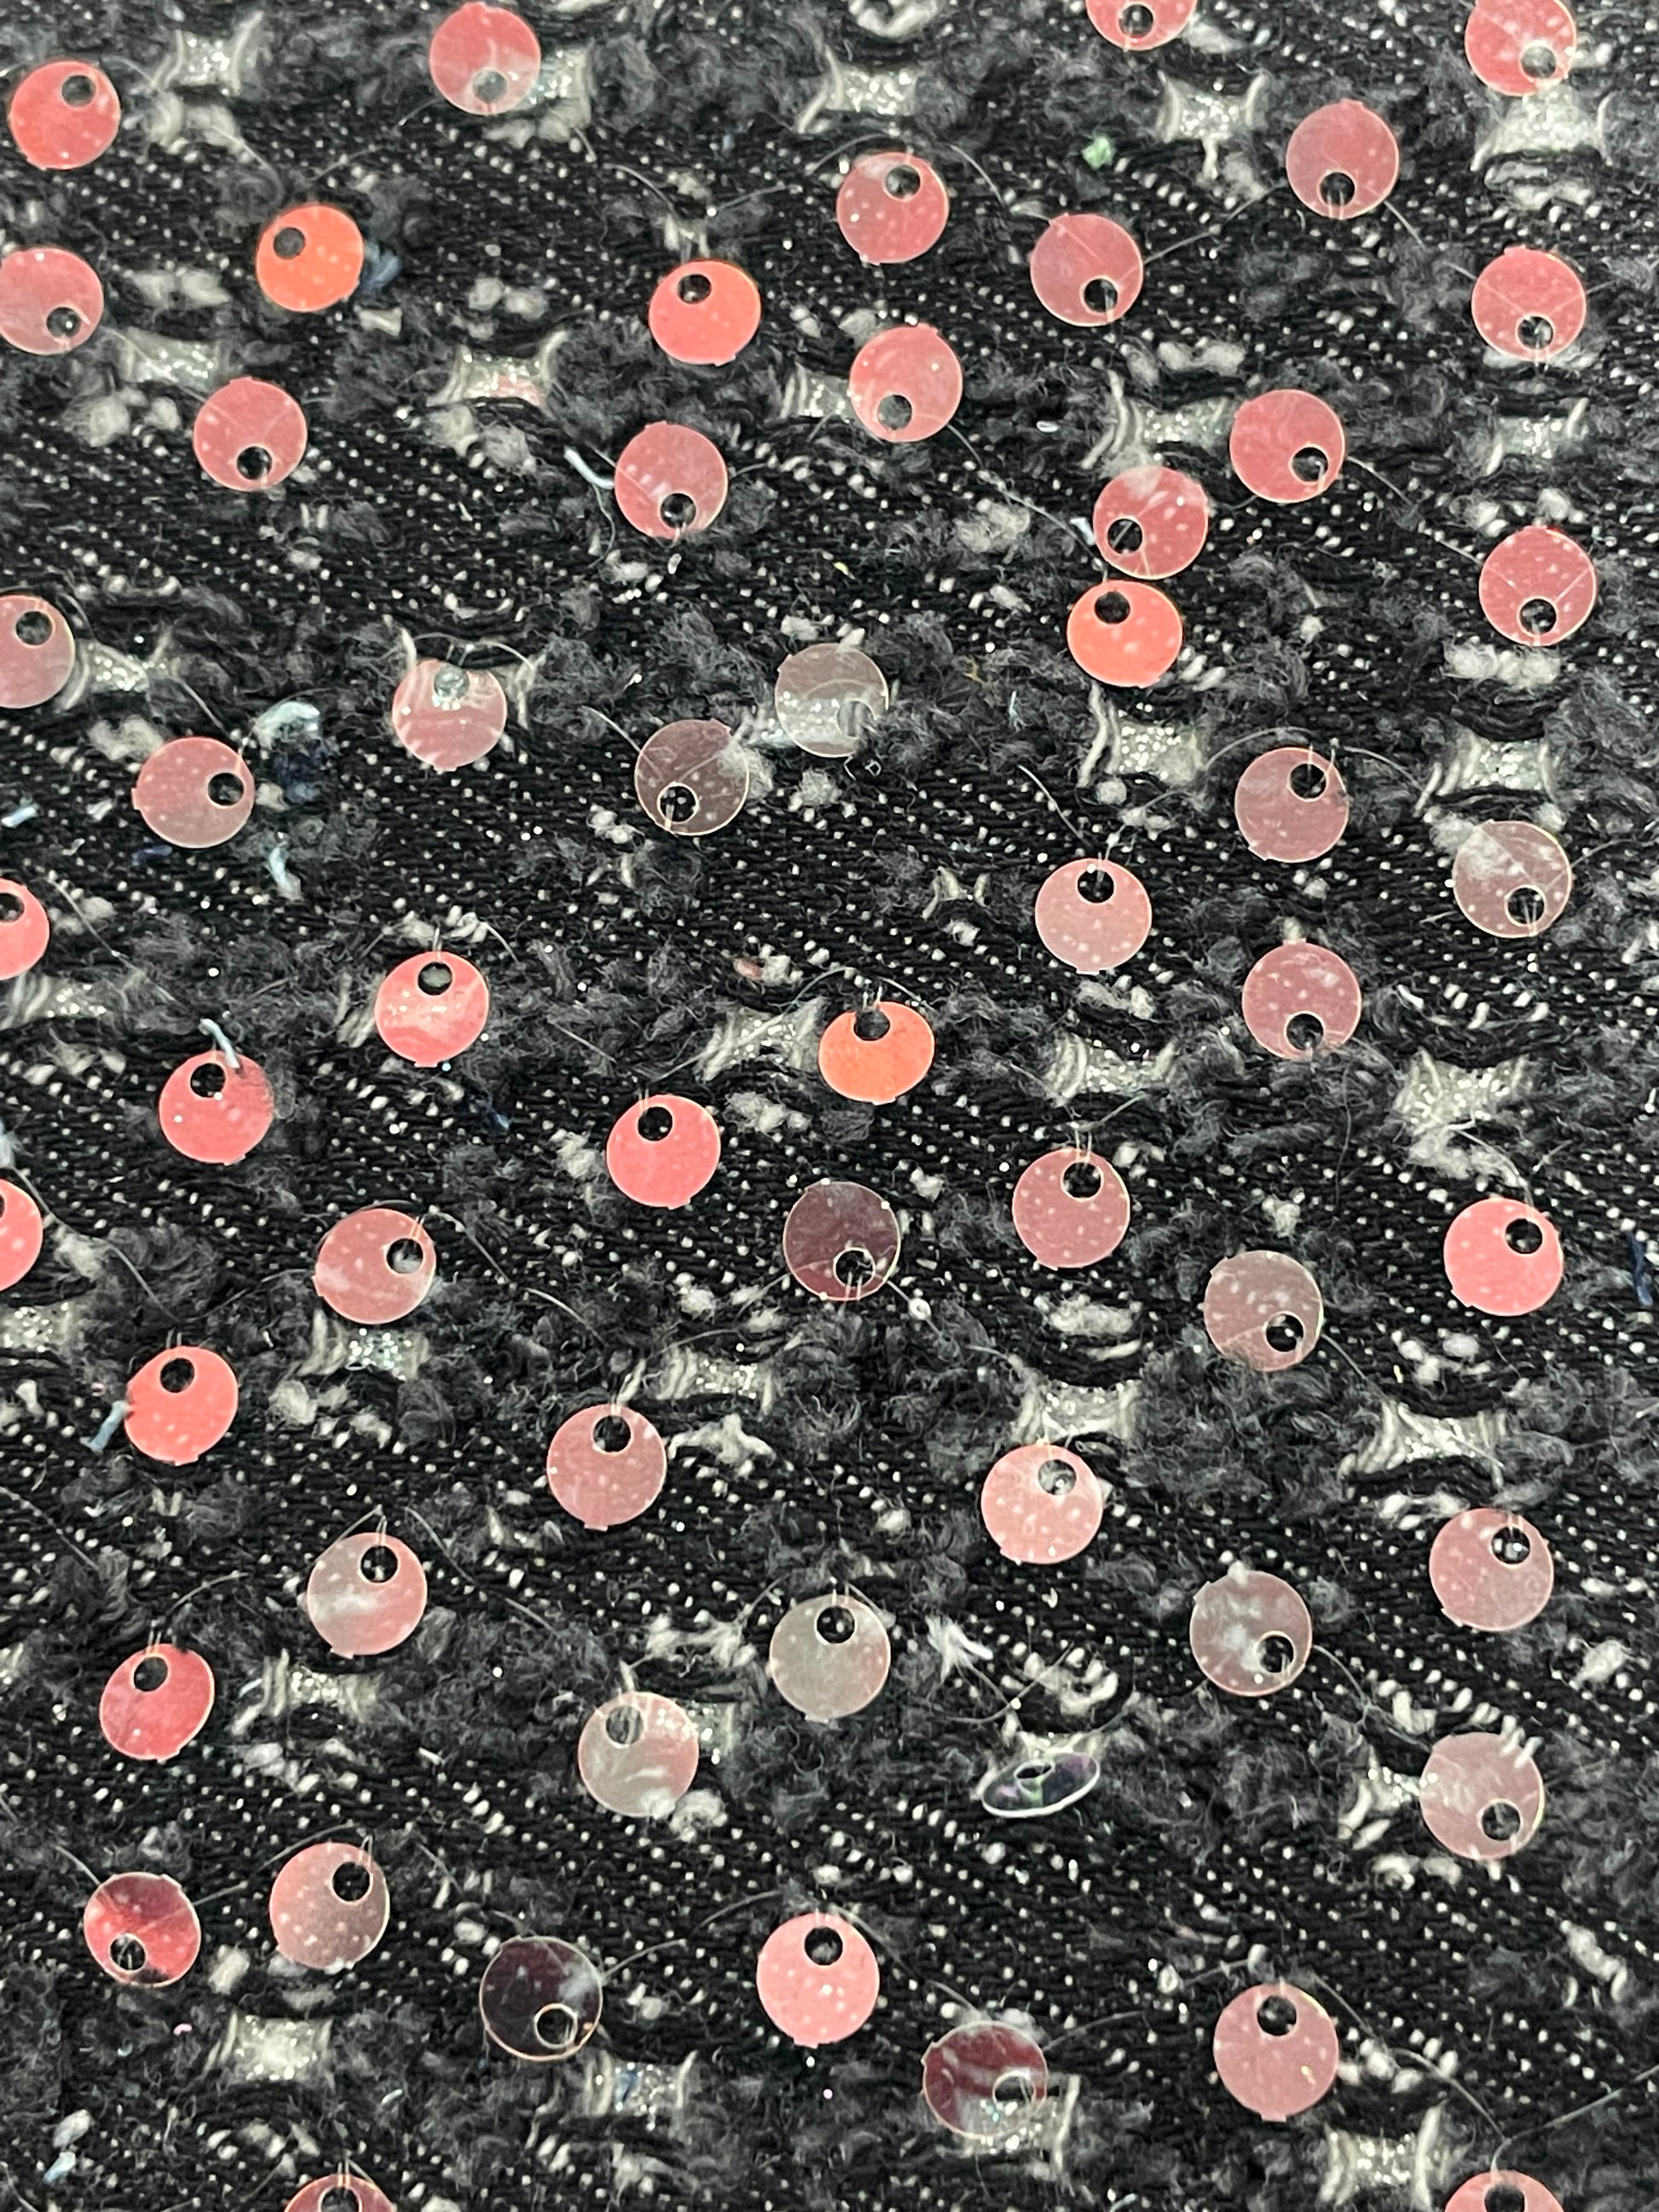 Special Woven Denim with Sequins Fabric on Sale - Natasha Fabric